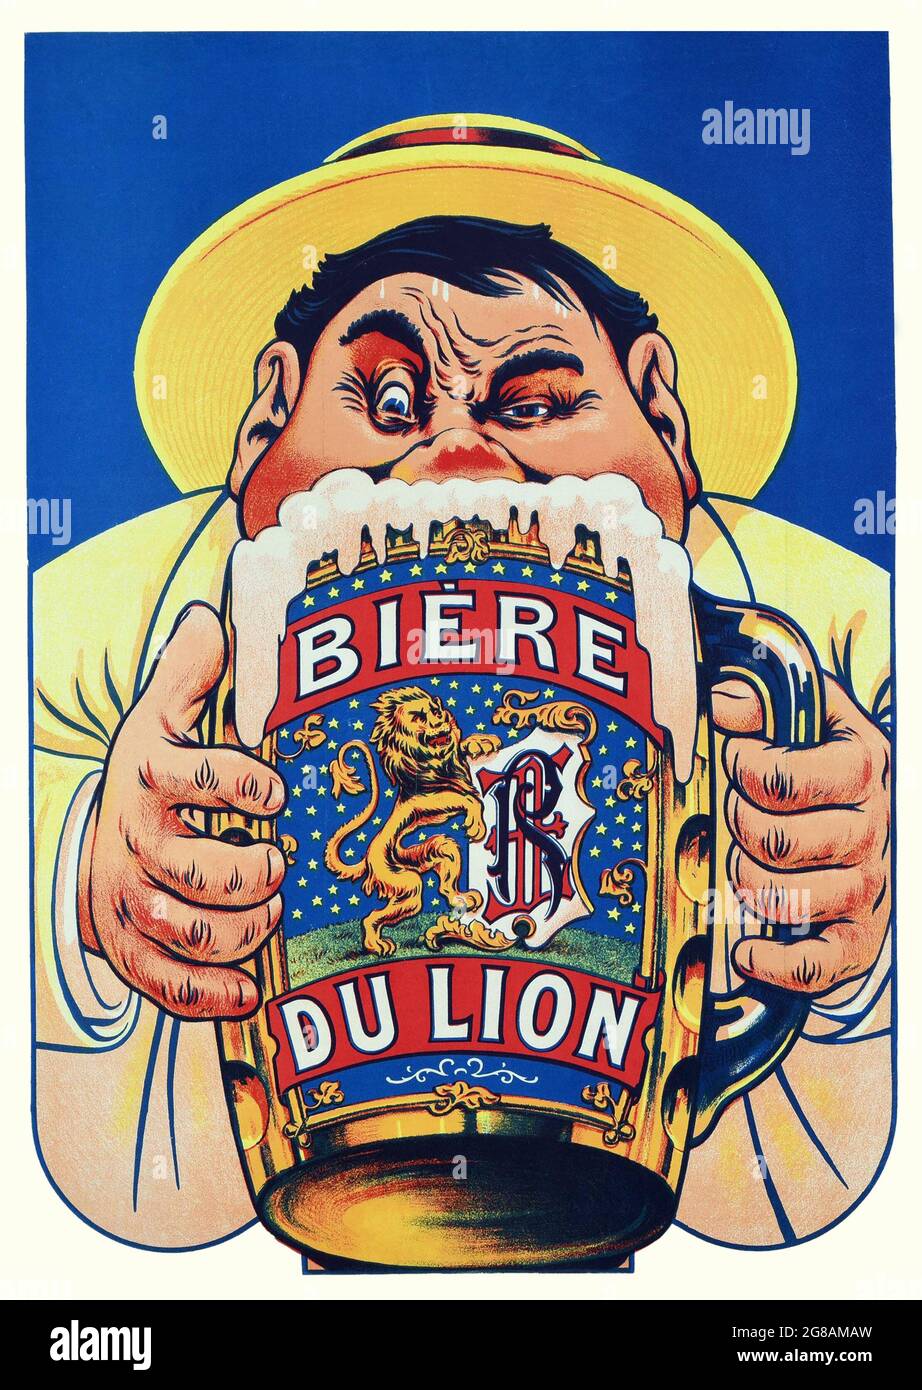 Bière du Lion. Vintage advertisement for beer. Man drinking a very large pint of beer. 1905. Art work by Eugène Ogé. Stock Photo